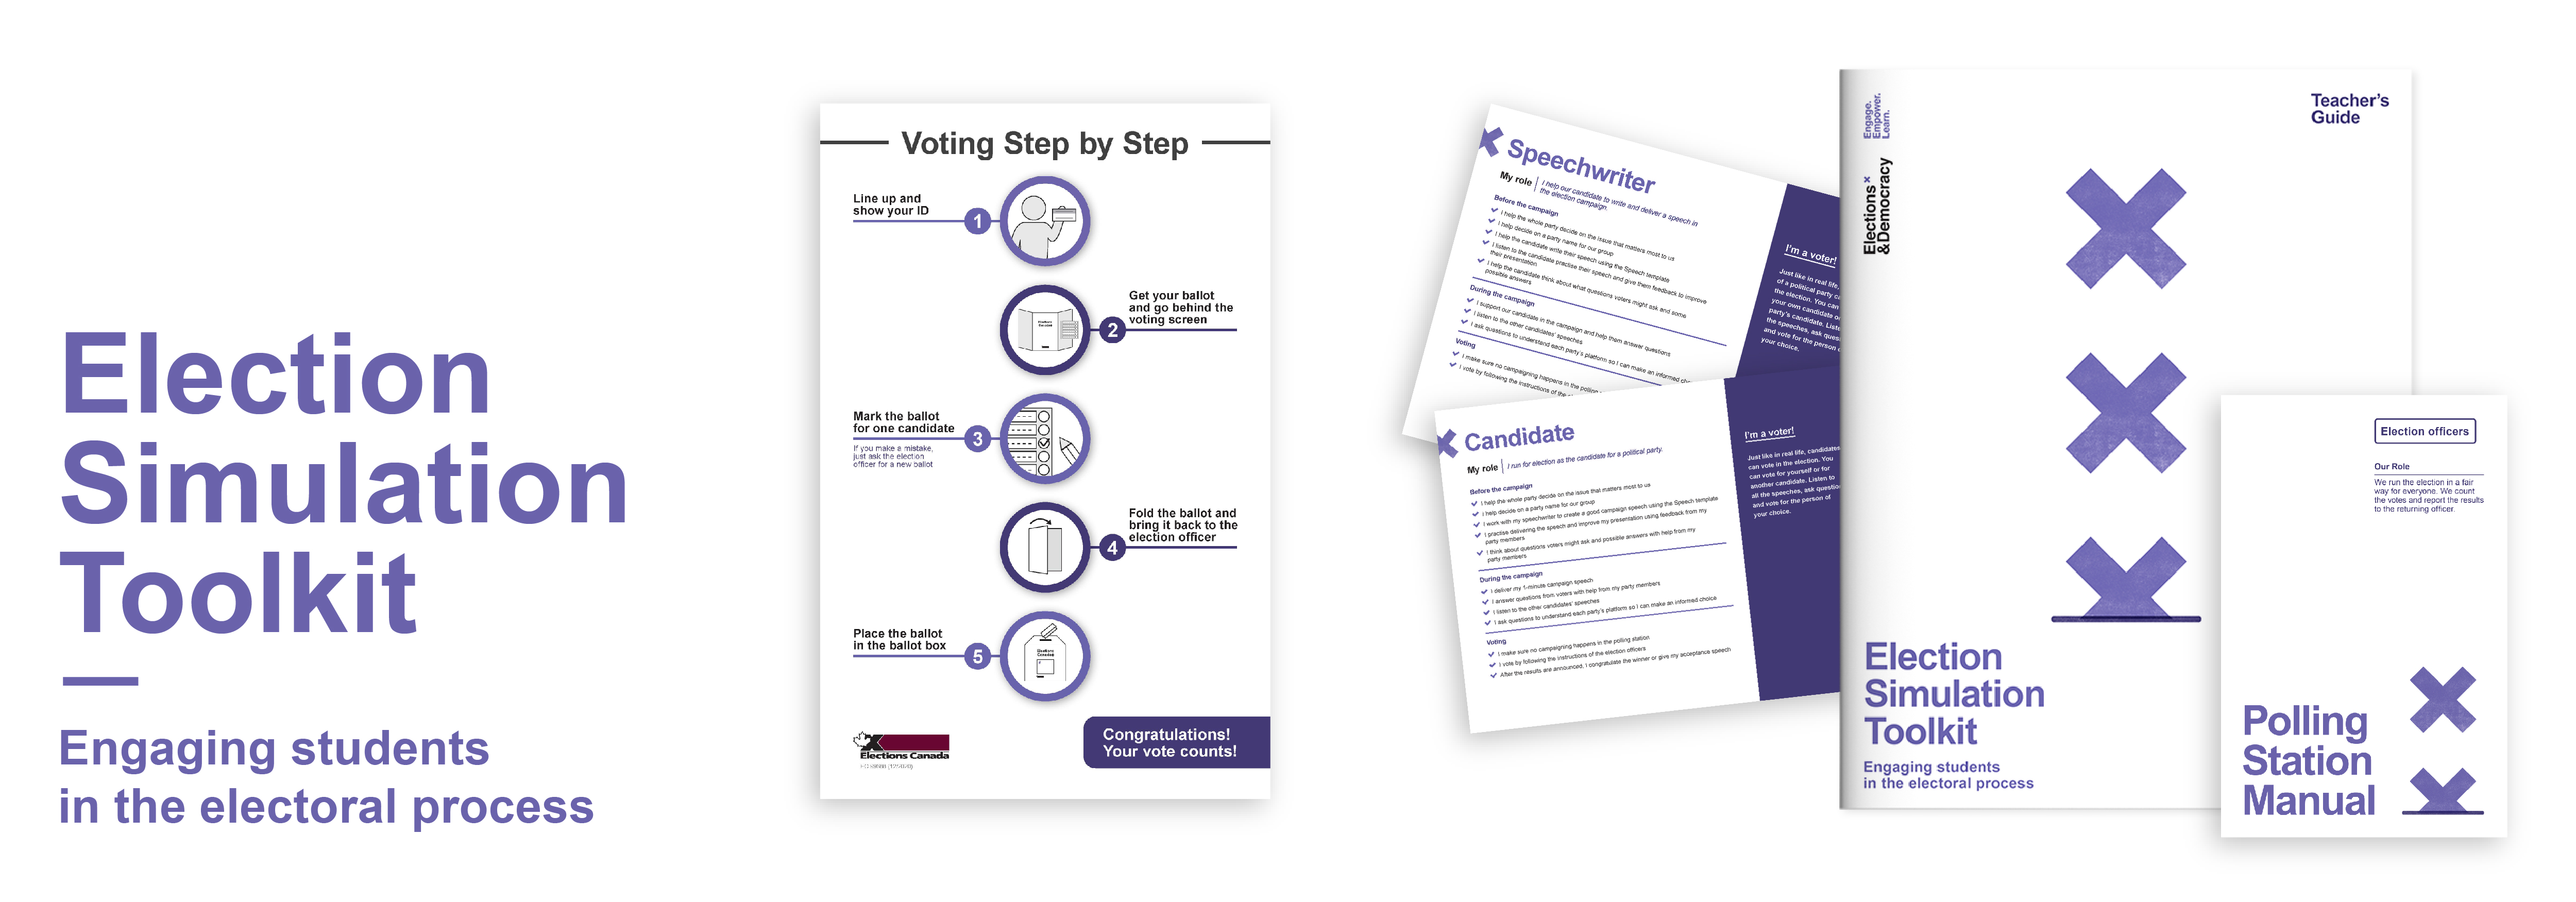 Election Simulation Toolkit. Engaging students in the electoral process. Materials: a poster, role cards, polling station manual and teacher’s guide.